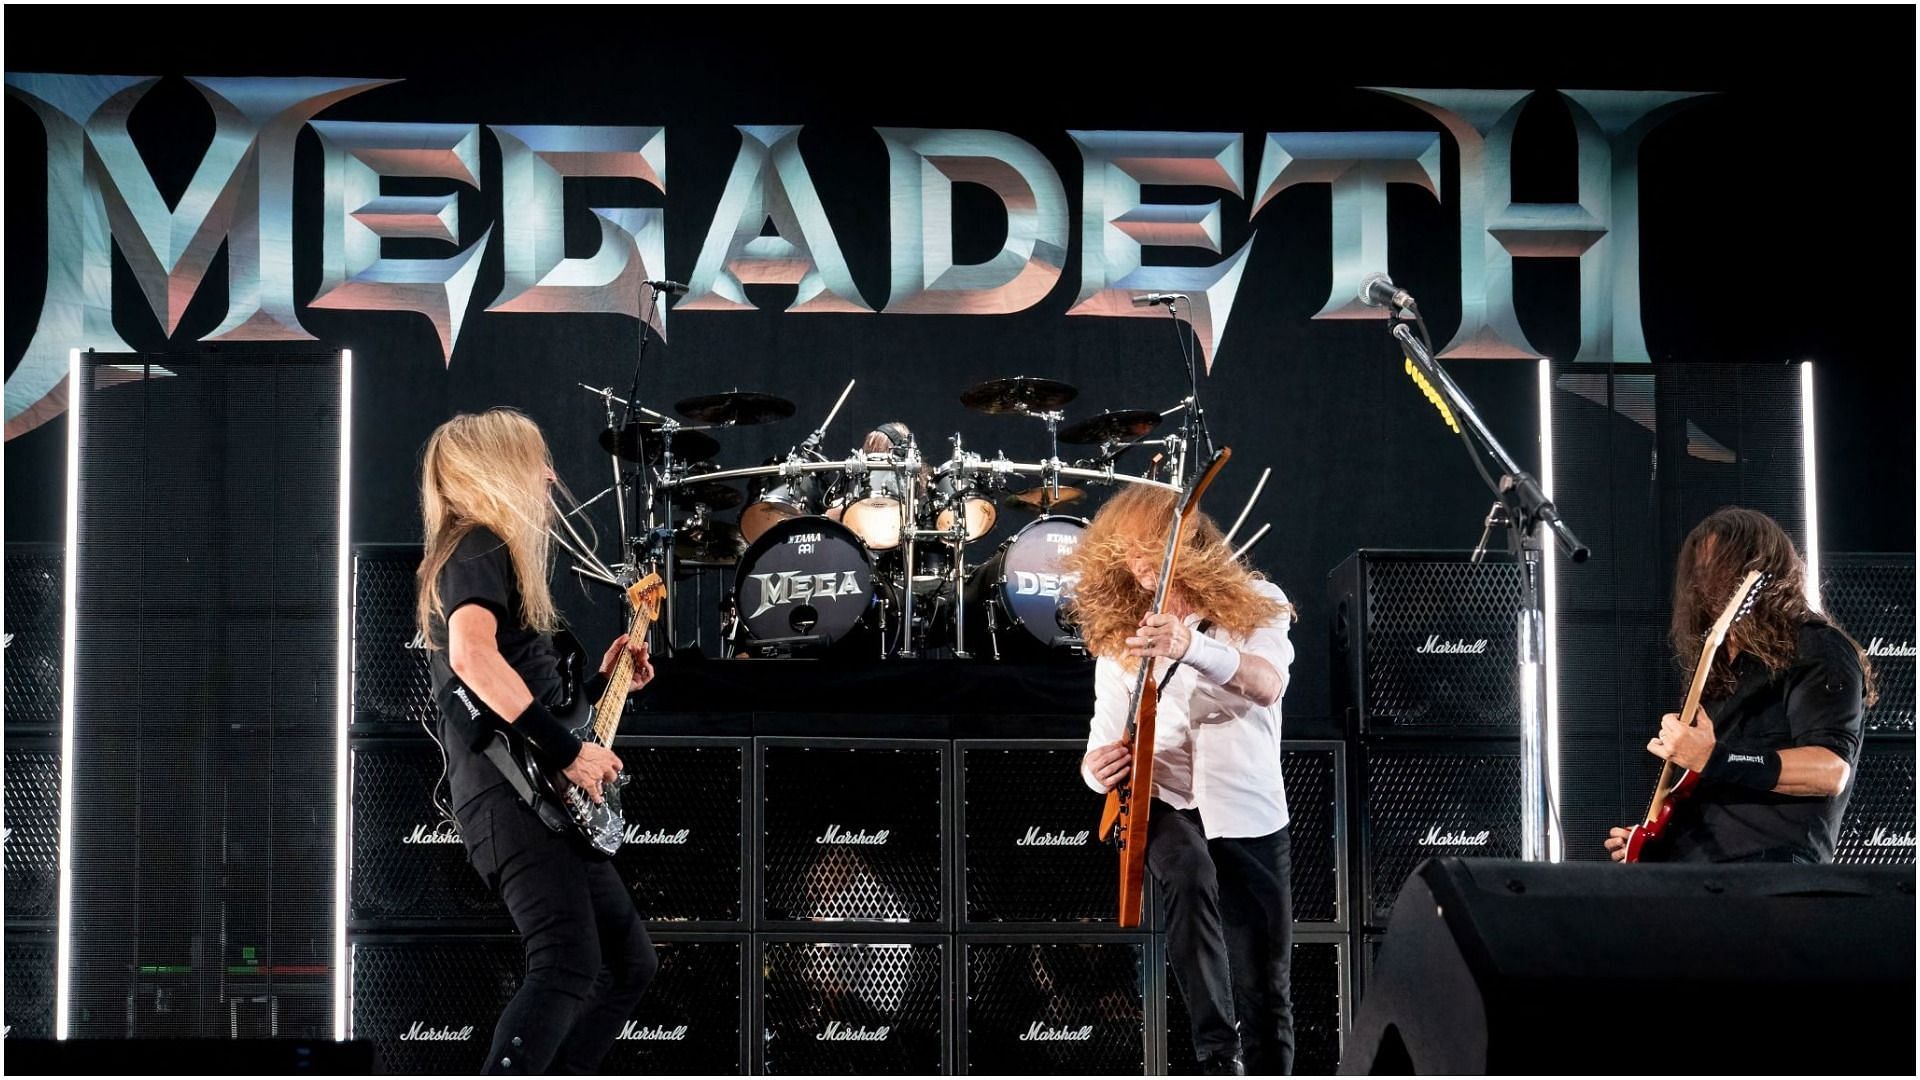 James Lomenzo, Dave Mustaine, and Kiko Loureiro of Megadeth performs on stage at the Germania Insurance Amphitheater in Austin, Texas (Image by Suzanne Cordeiro via Getty Images)